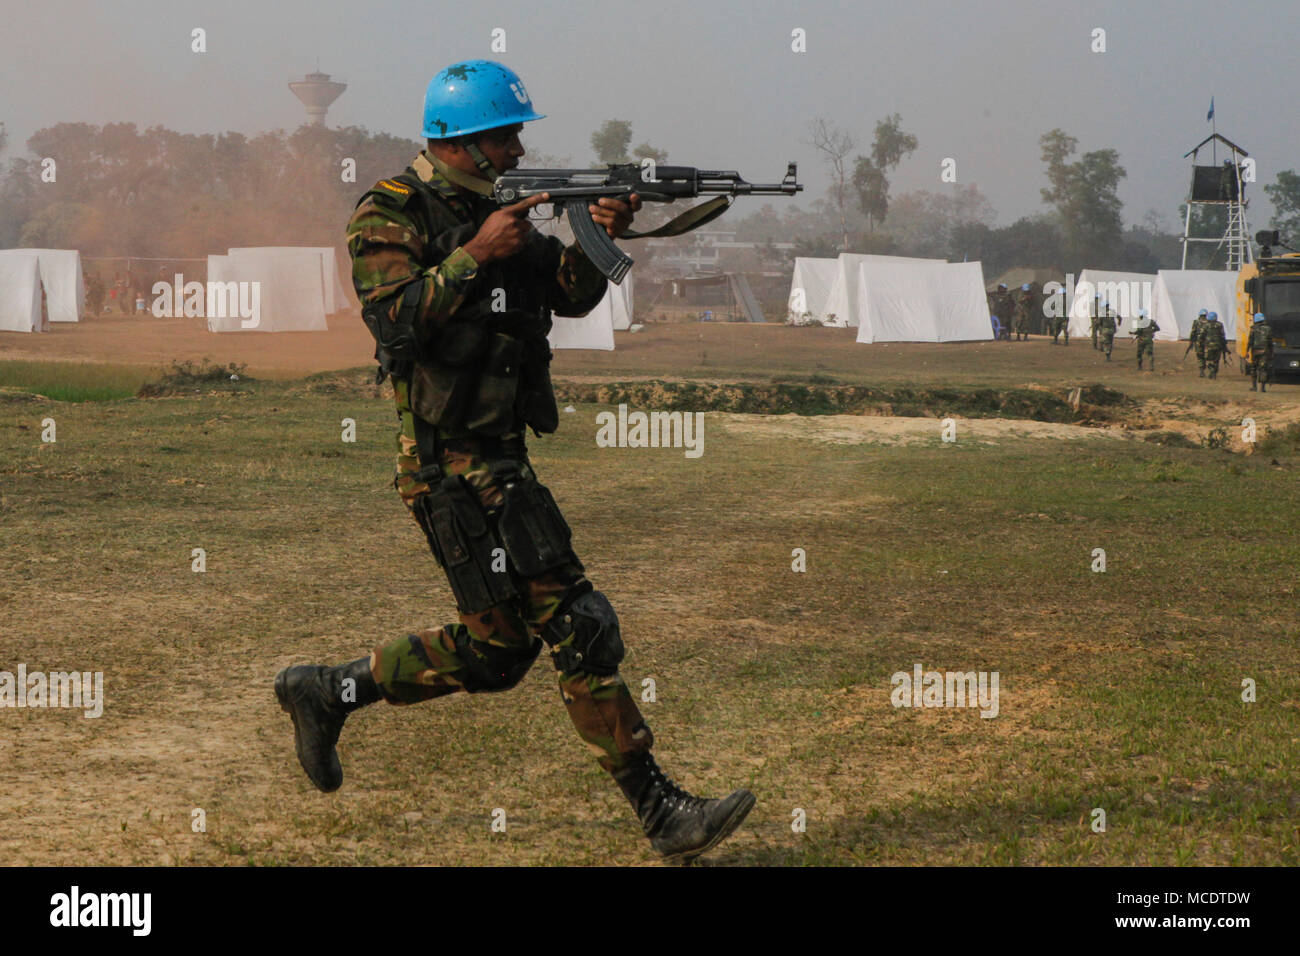 A Bangladesh Army soldier of the Para-Commando Brigade runs to secure a drop zone during a rehearsal for a demonstration as part of Exercise Shanti Doot 4 in Bangladesh. Shanti Doot 4 is a multinational United Nations peacekeeping exercise with more than 1,000 participants from more than 30 countries designed to provide pre-deployment training to U.N. partner countries in preparation for real-world peacekeeping operations. (U.S. Marine Corps photo by Lance Cpl. Adam Montera) Stock Photo